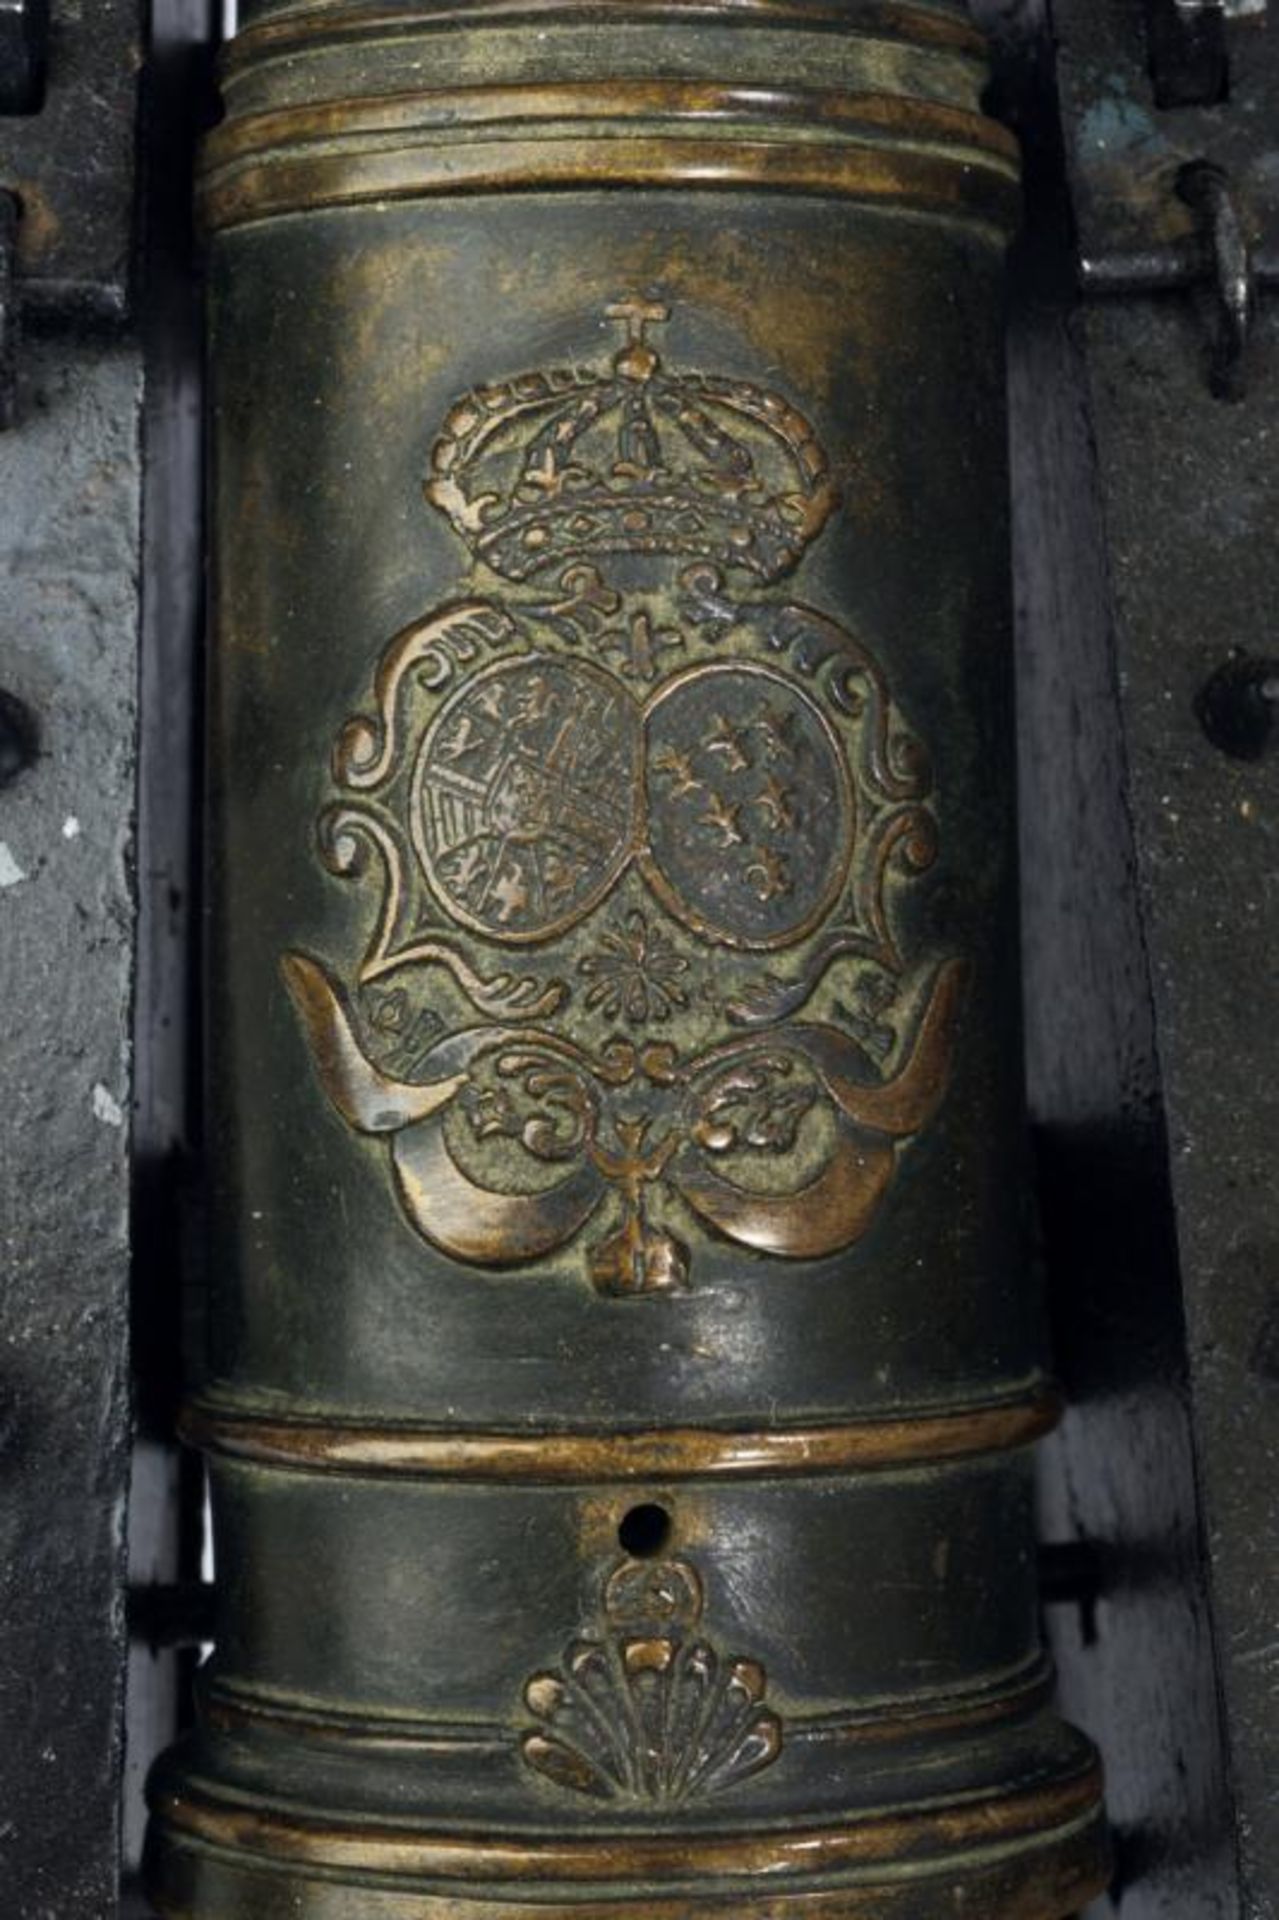 A bronze cannon model with the coat of arms of Elisabetta Farnese, Queen of Spain - Image 5 of 6